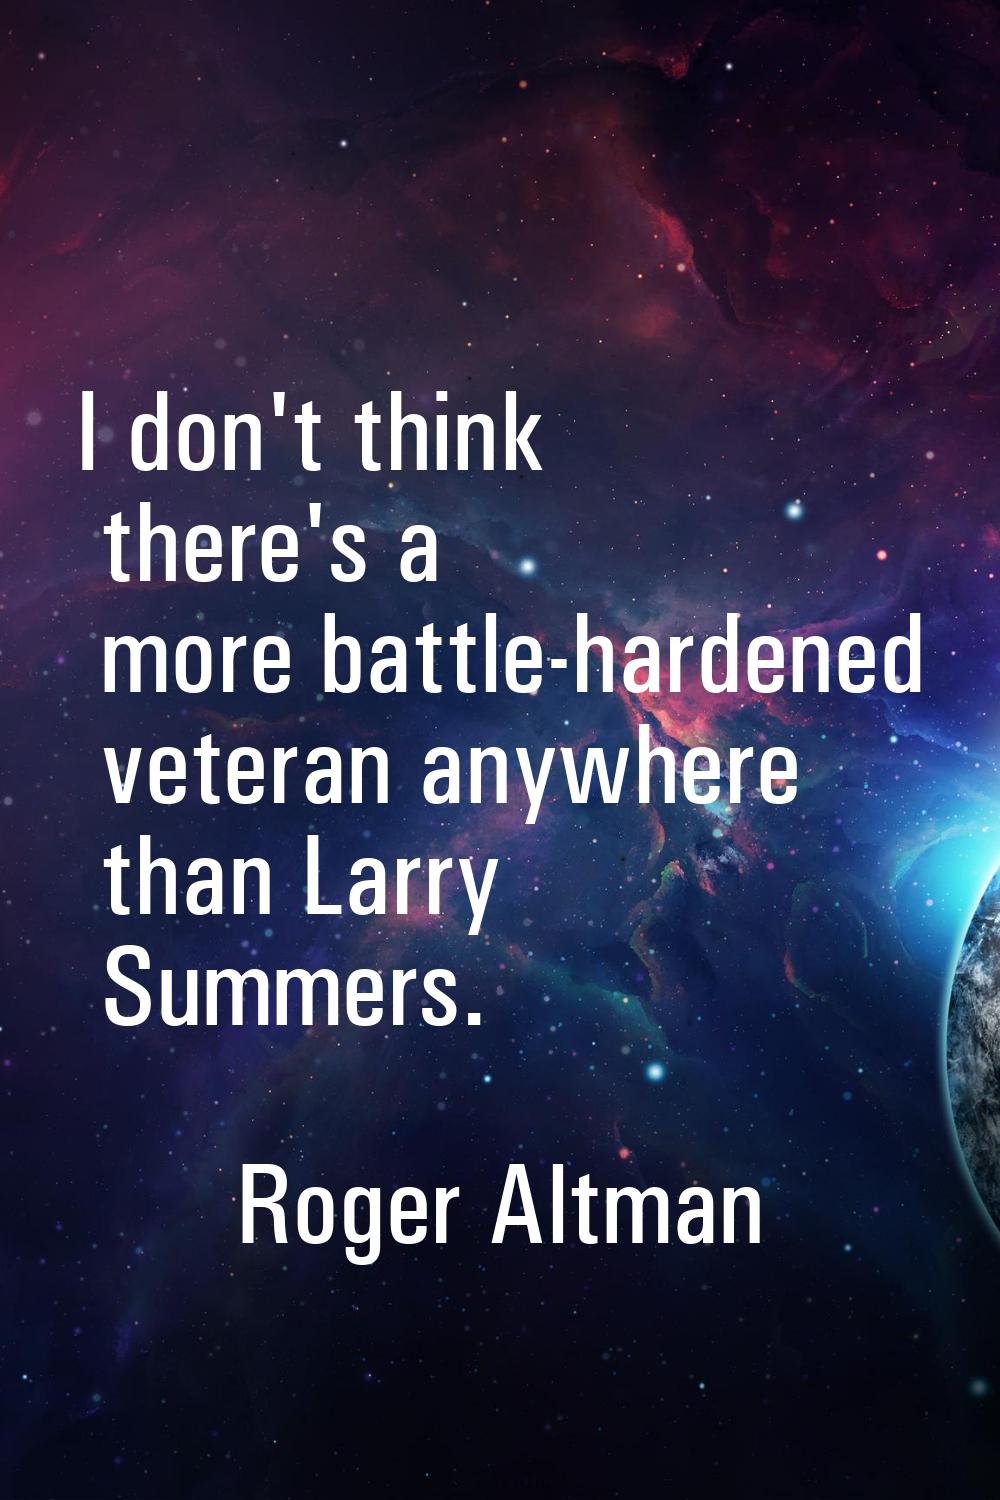 I don't think there's a more battle-hardened veteran anywhere than Larry Summers.